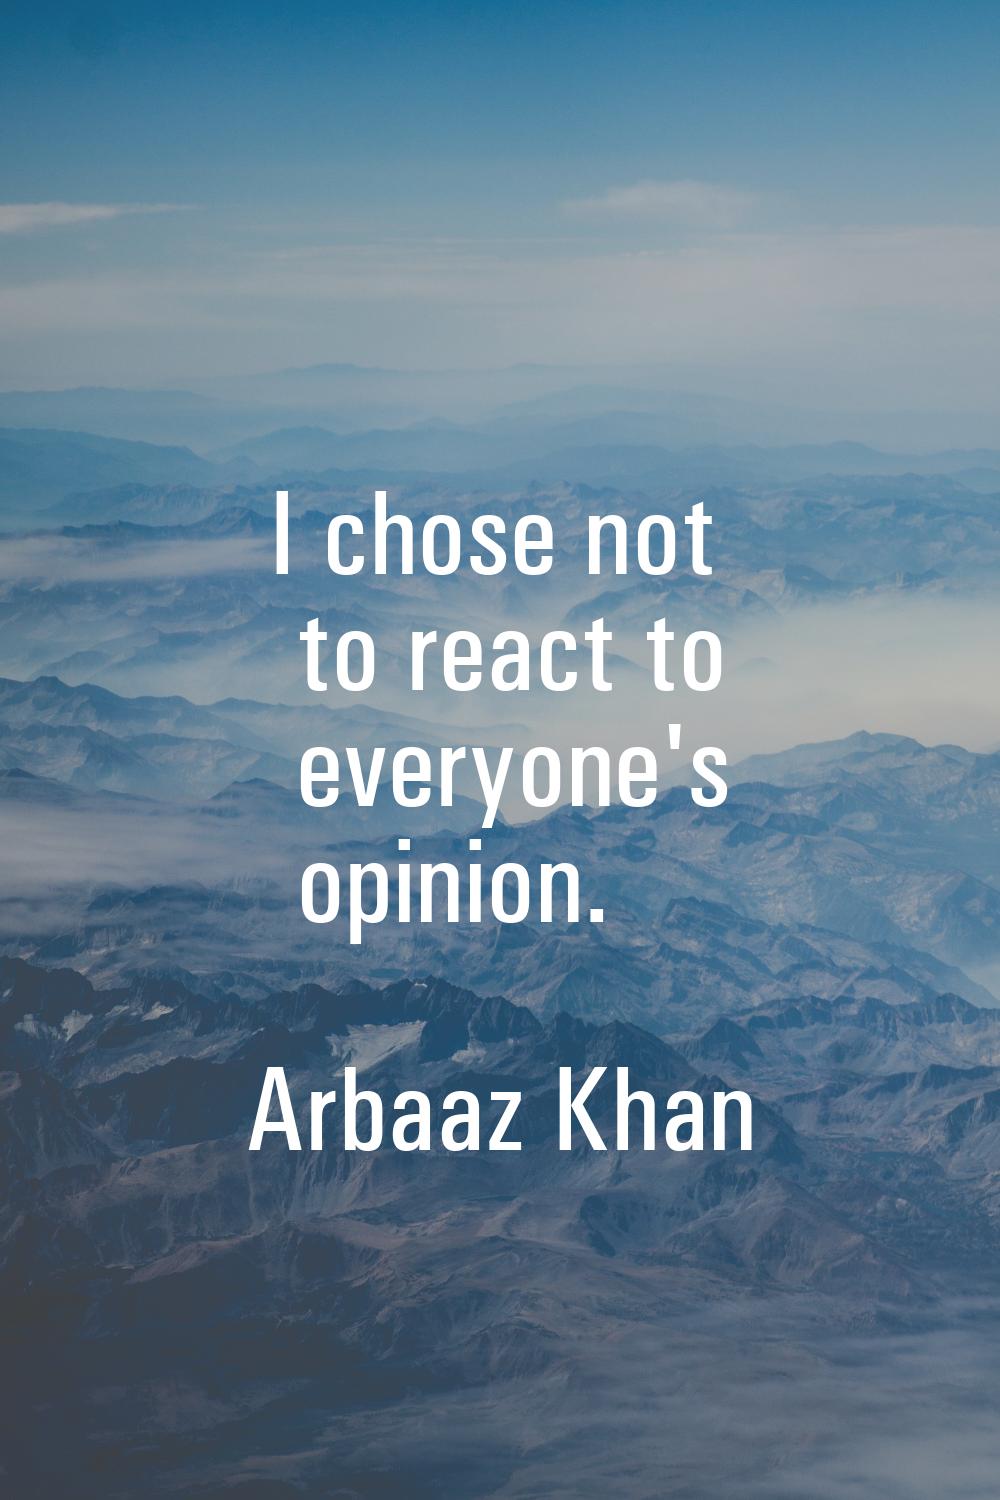 I chose not to react to everyone's opinion.